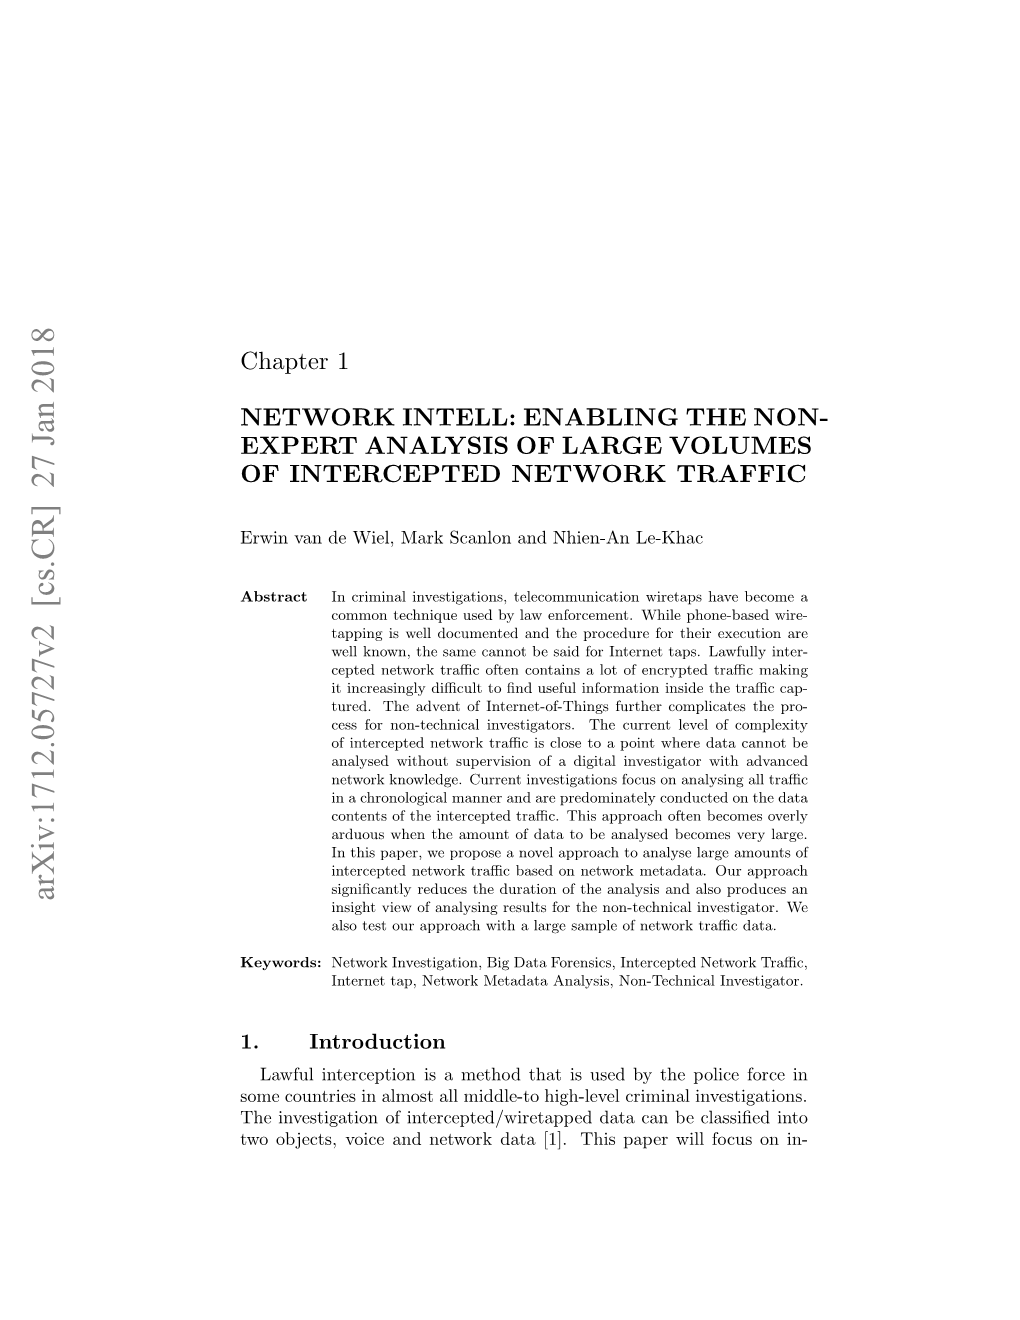 Network Intell: Enabling the Non-Expert Analysis of Large Volumes of Intercepted Network Traffic